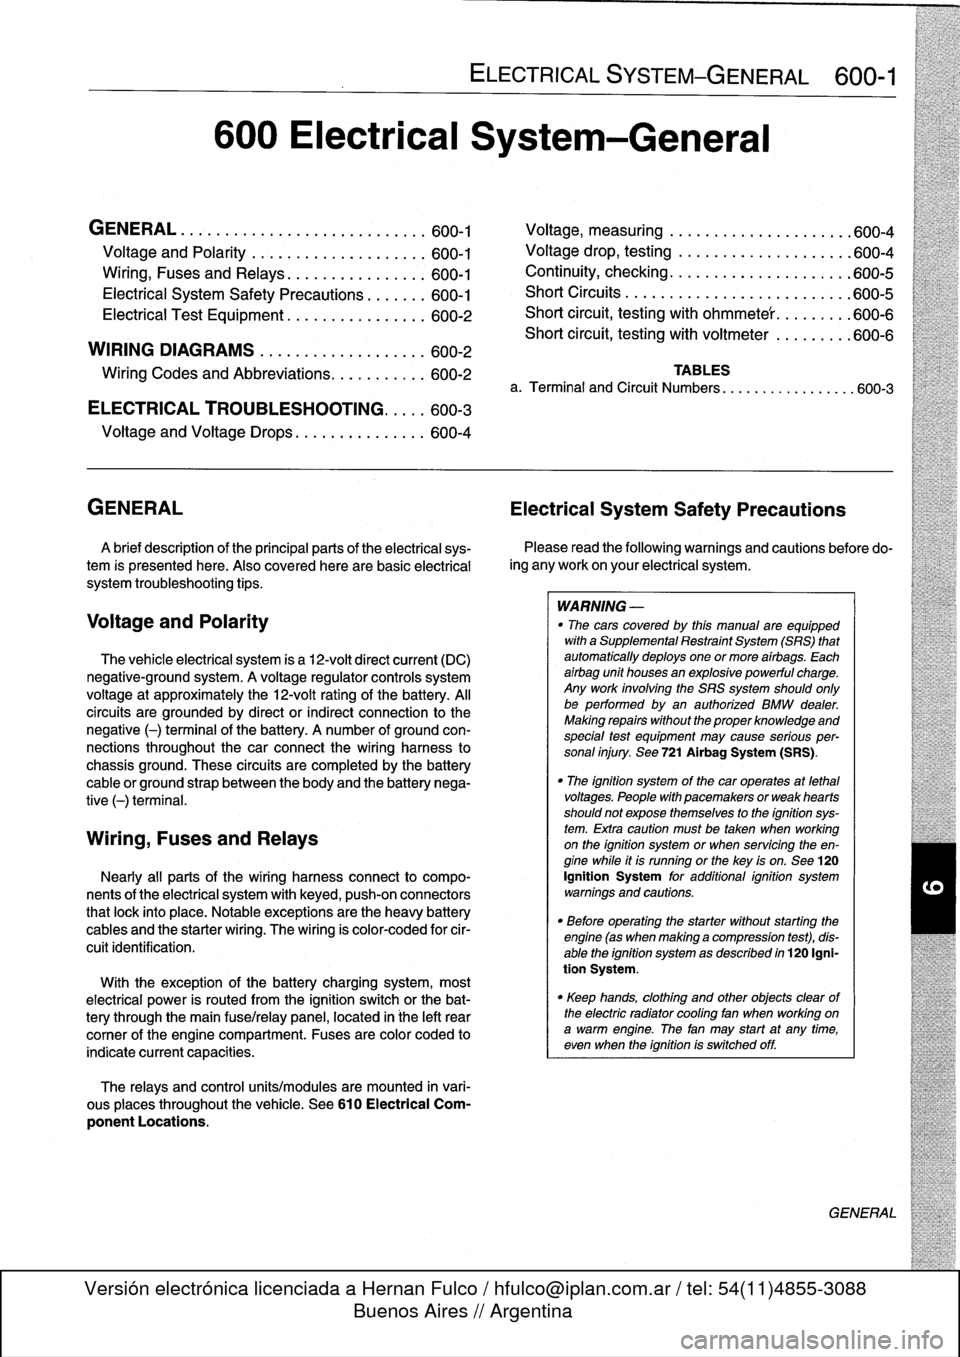 BMW 318i 1997 E36 Owners Manual 
600
Electrical
System-General

GENERAL
.
...........
.
.
.
.
.
.
.
.
.
...
.
...
600-1

Voltage
and
Polarity
........
.
.
.
.
.
.
.
.....
600-1

Ming,
Fuses
and
Relays
............
.
.
.
.
600-1

Ele